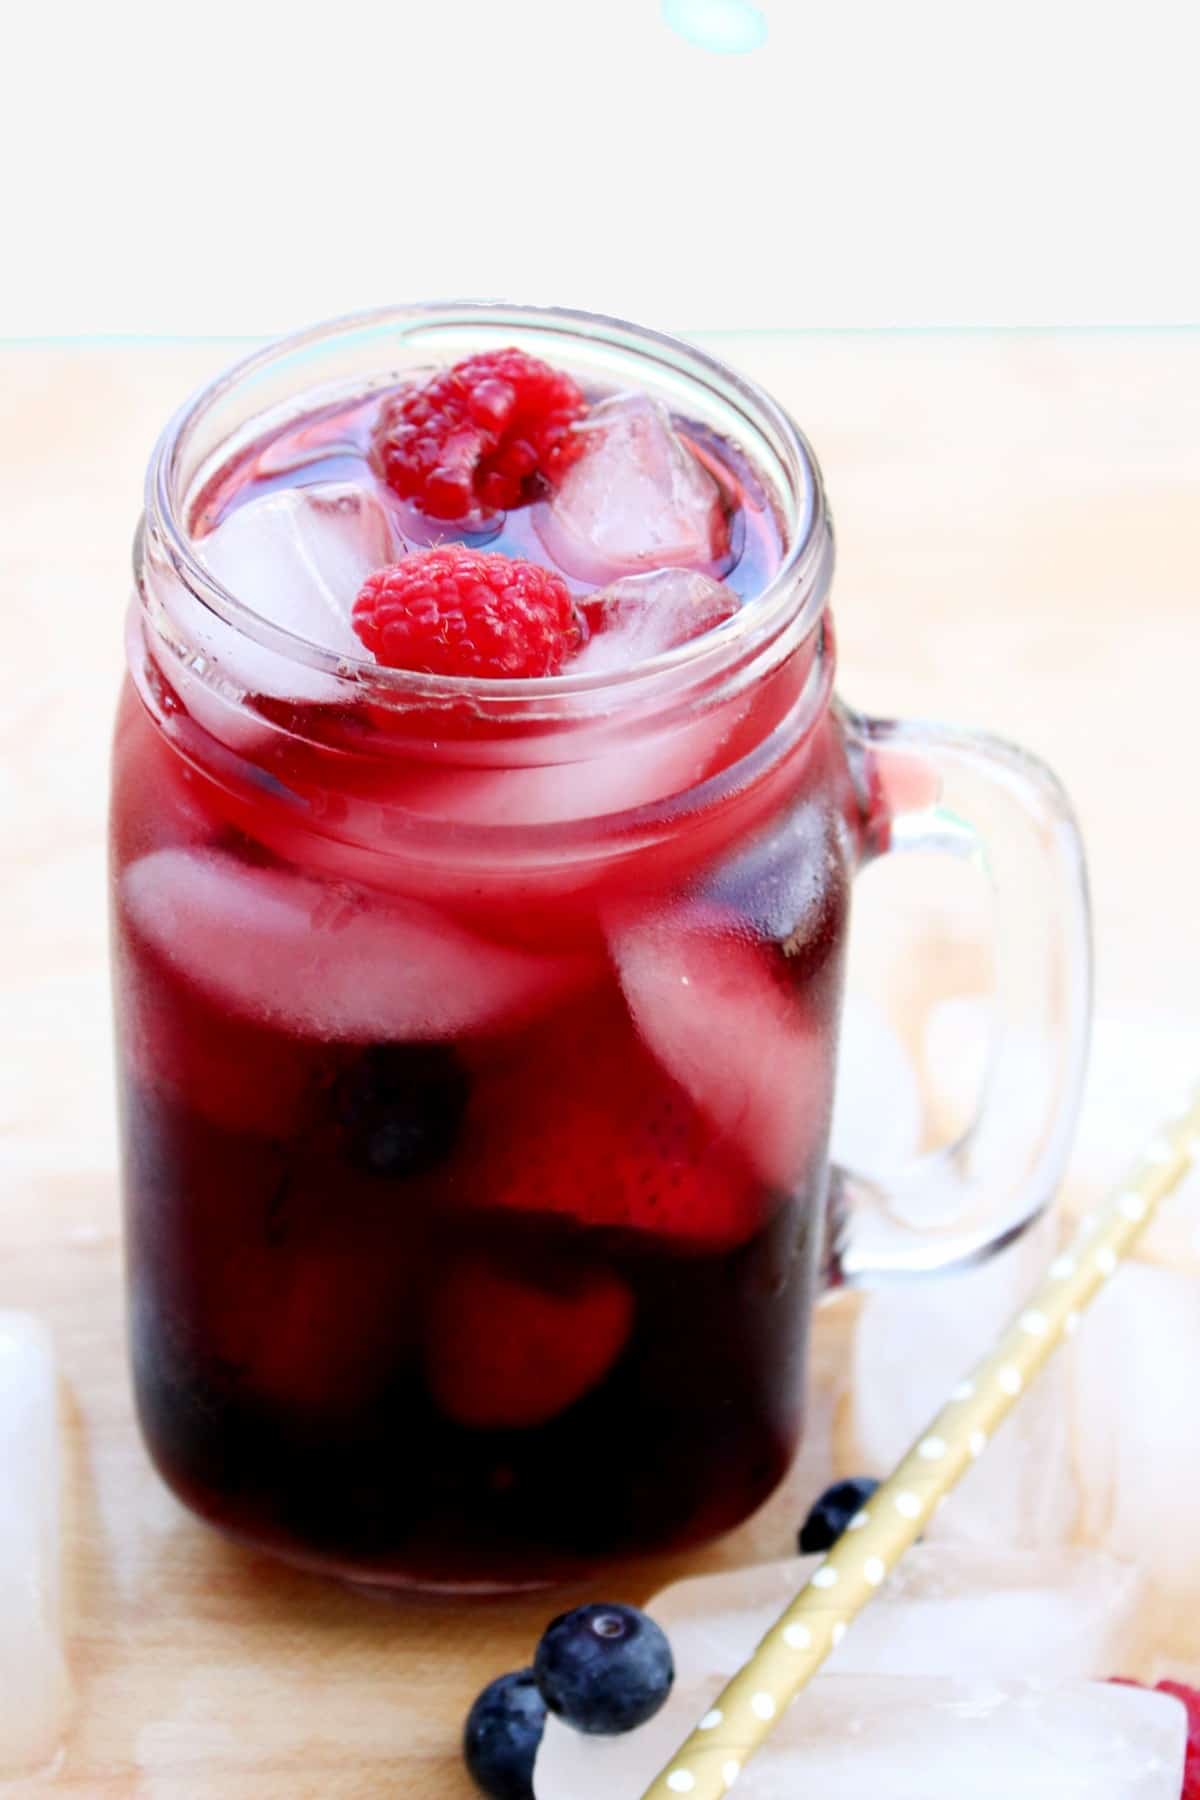 A mug glass is full of rich looking red wine with berries and ice. A straw and ice are on the table next to it.